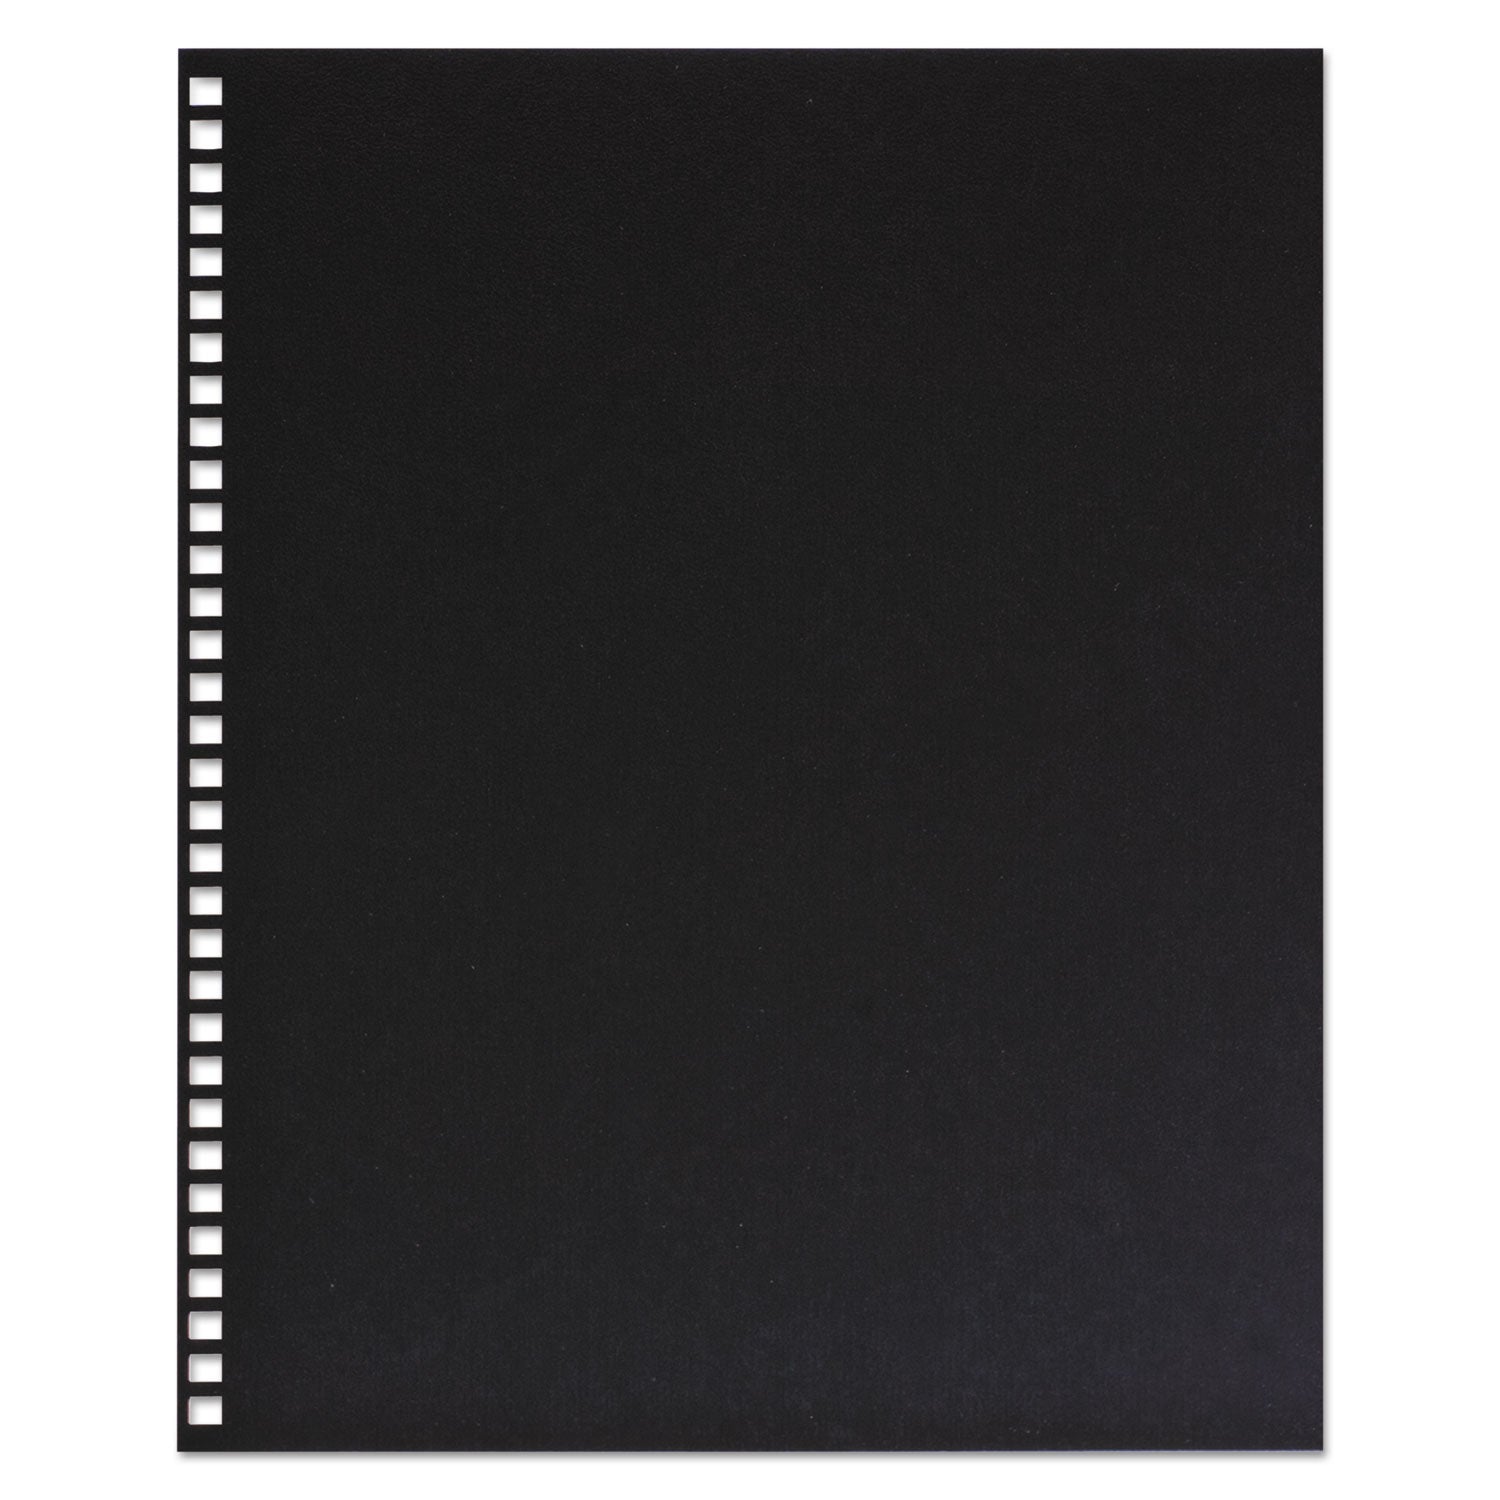 proclick-pre-punched-presentation-covers-black-11-x-85-punched-25-pack_gbc2514478 - 1